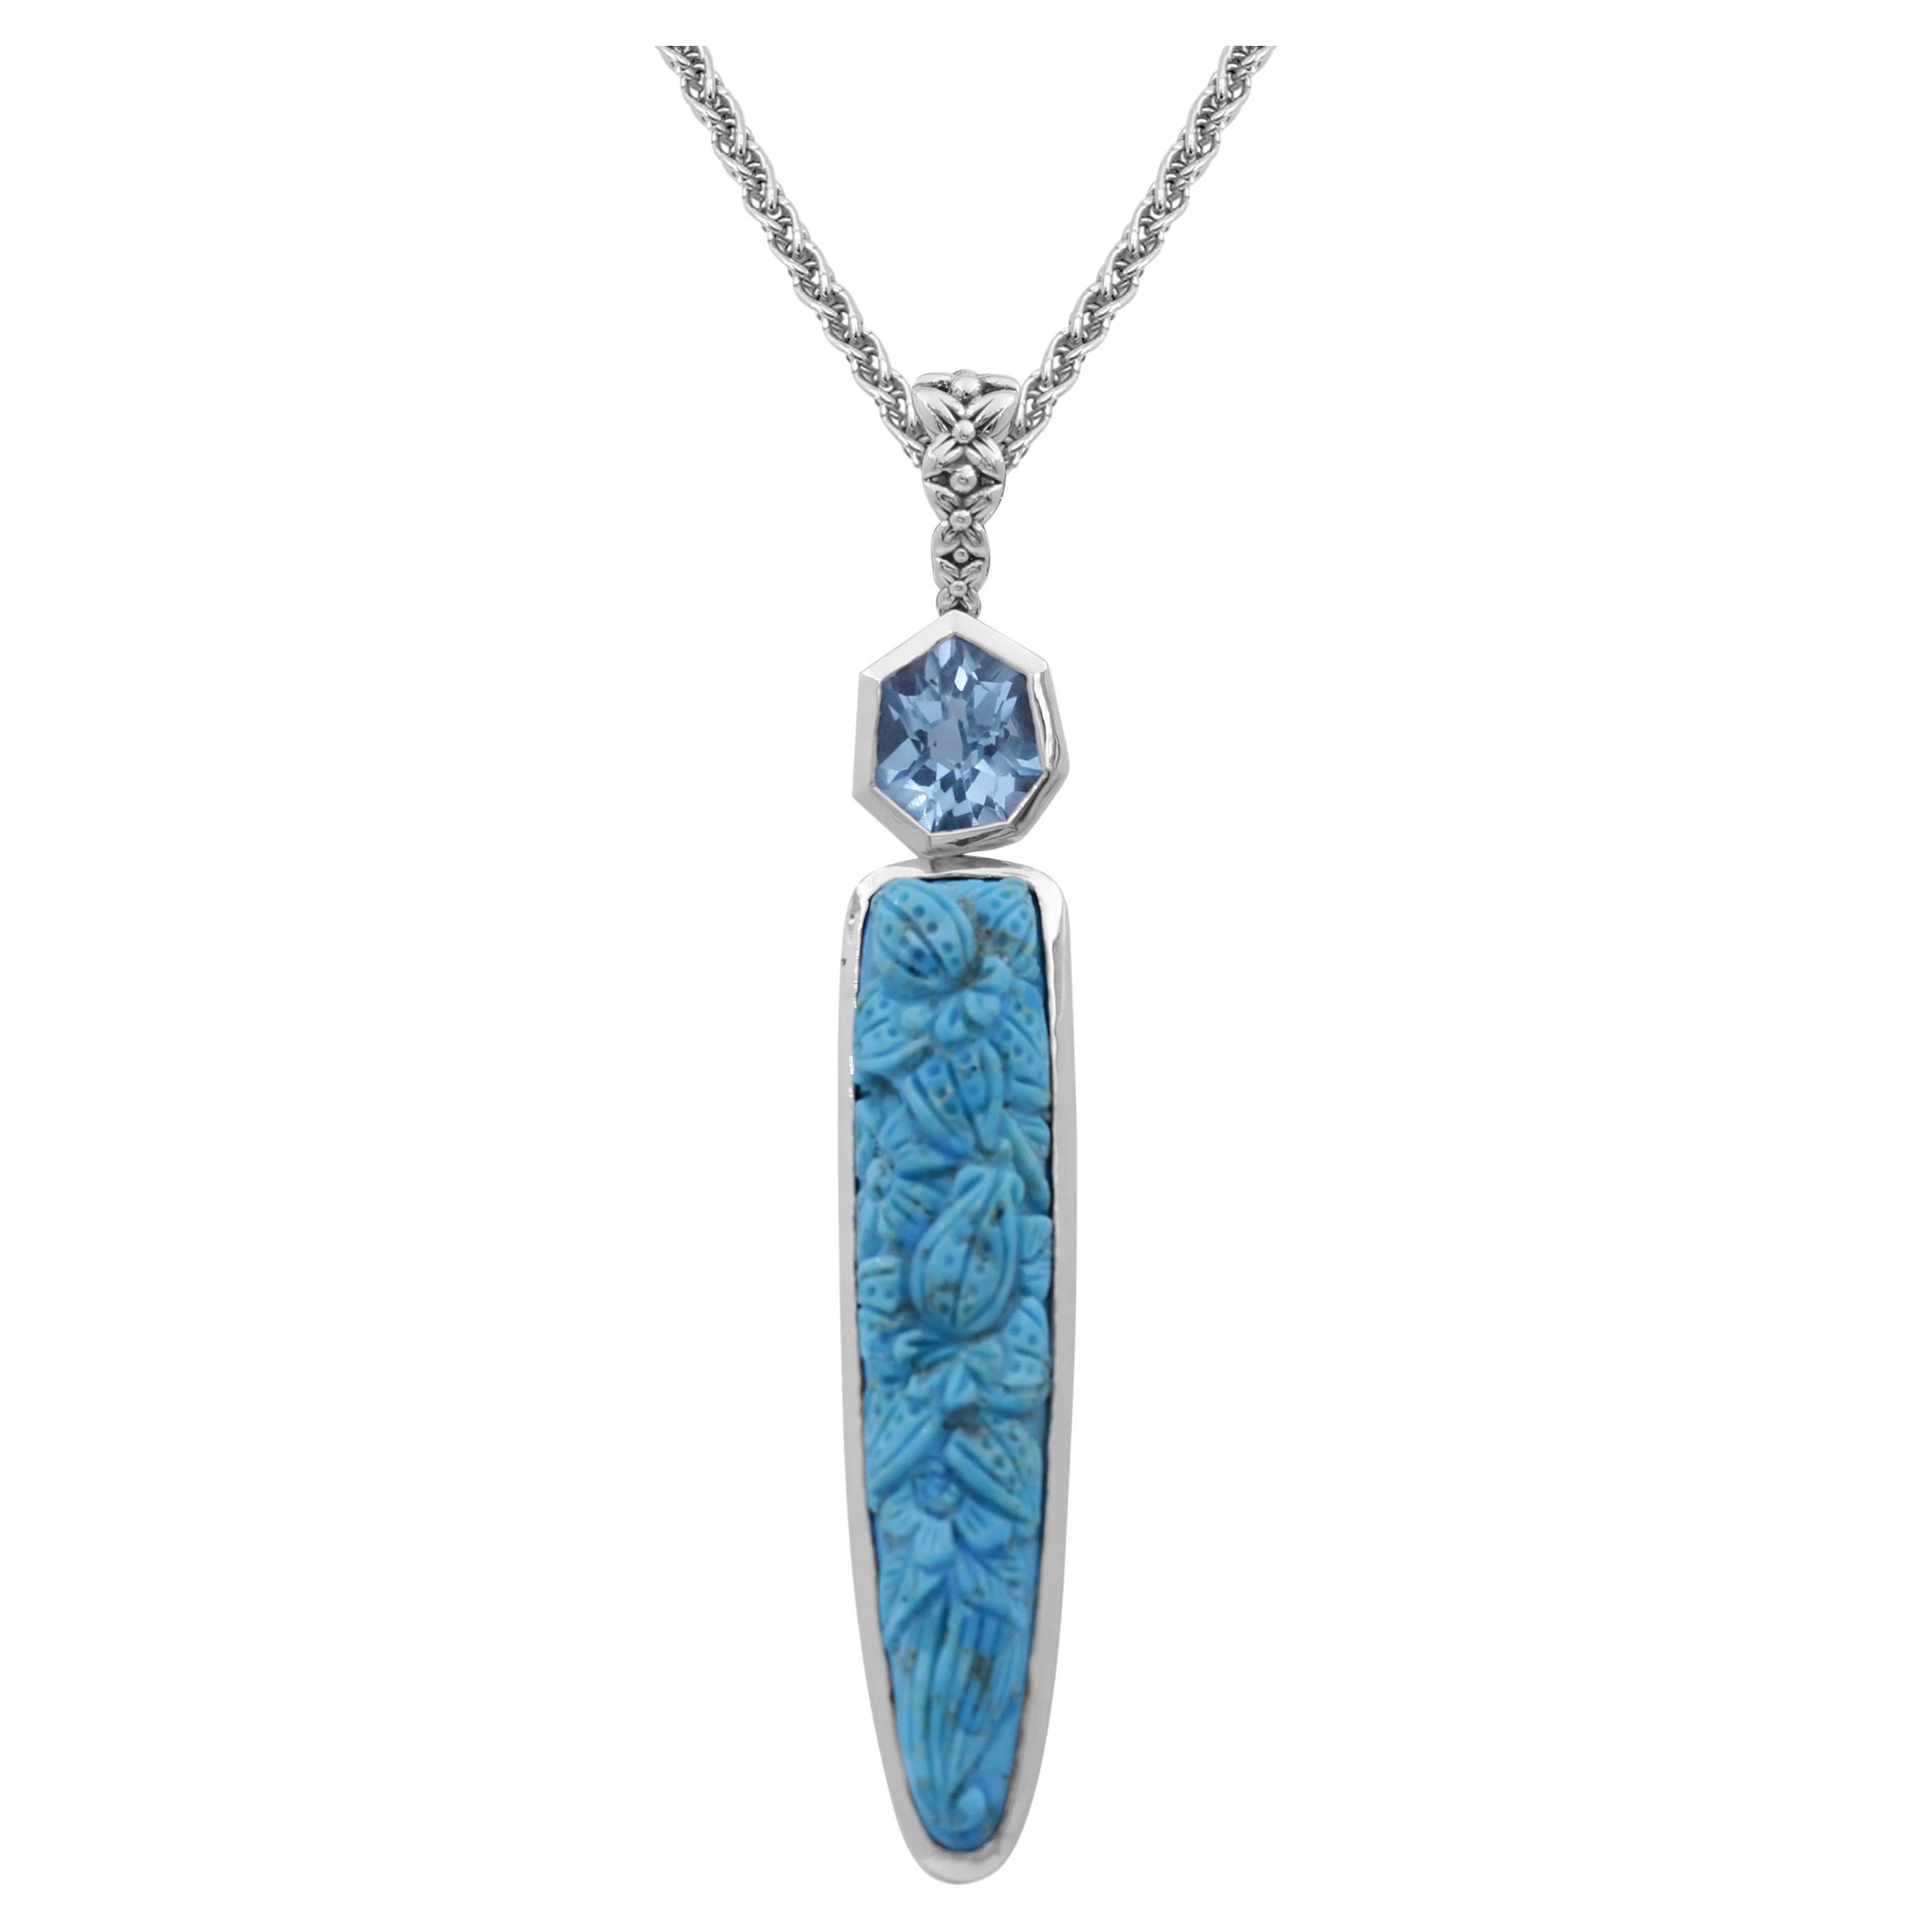 Hand Carved Turquoise and Faceted Blue Topaz Pendant in Sterling Silver